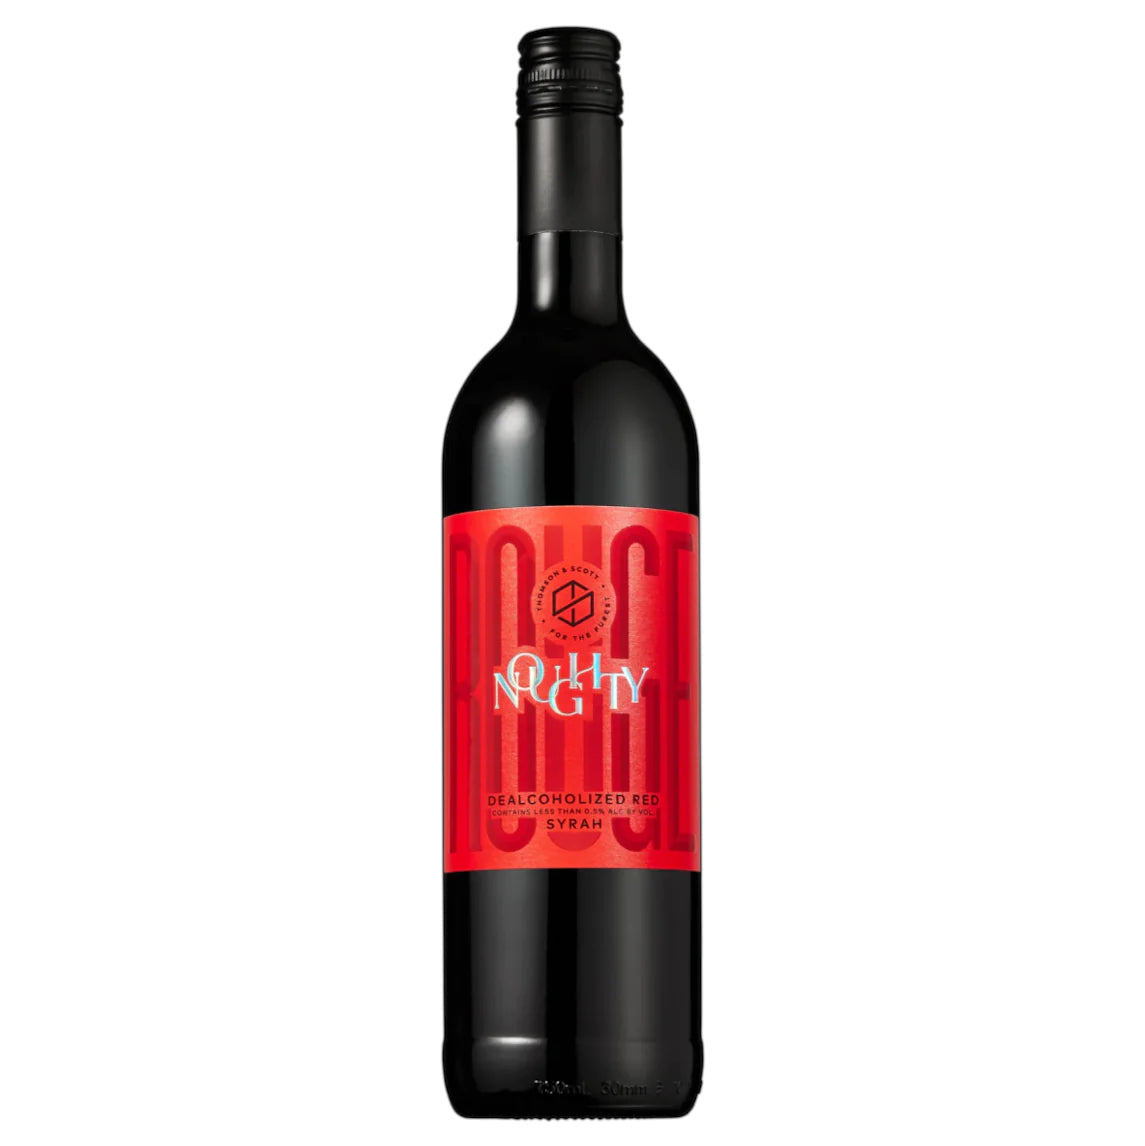 Noughty Dealcoholized Red Wine